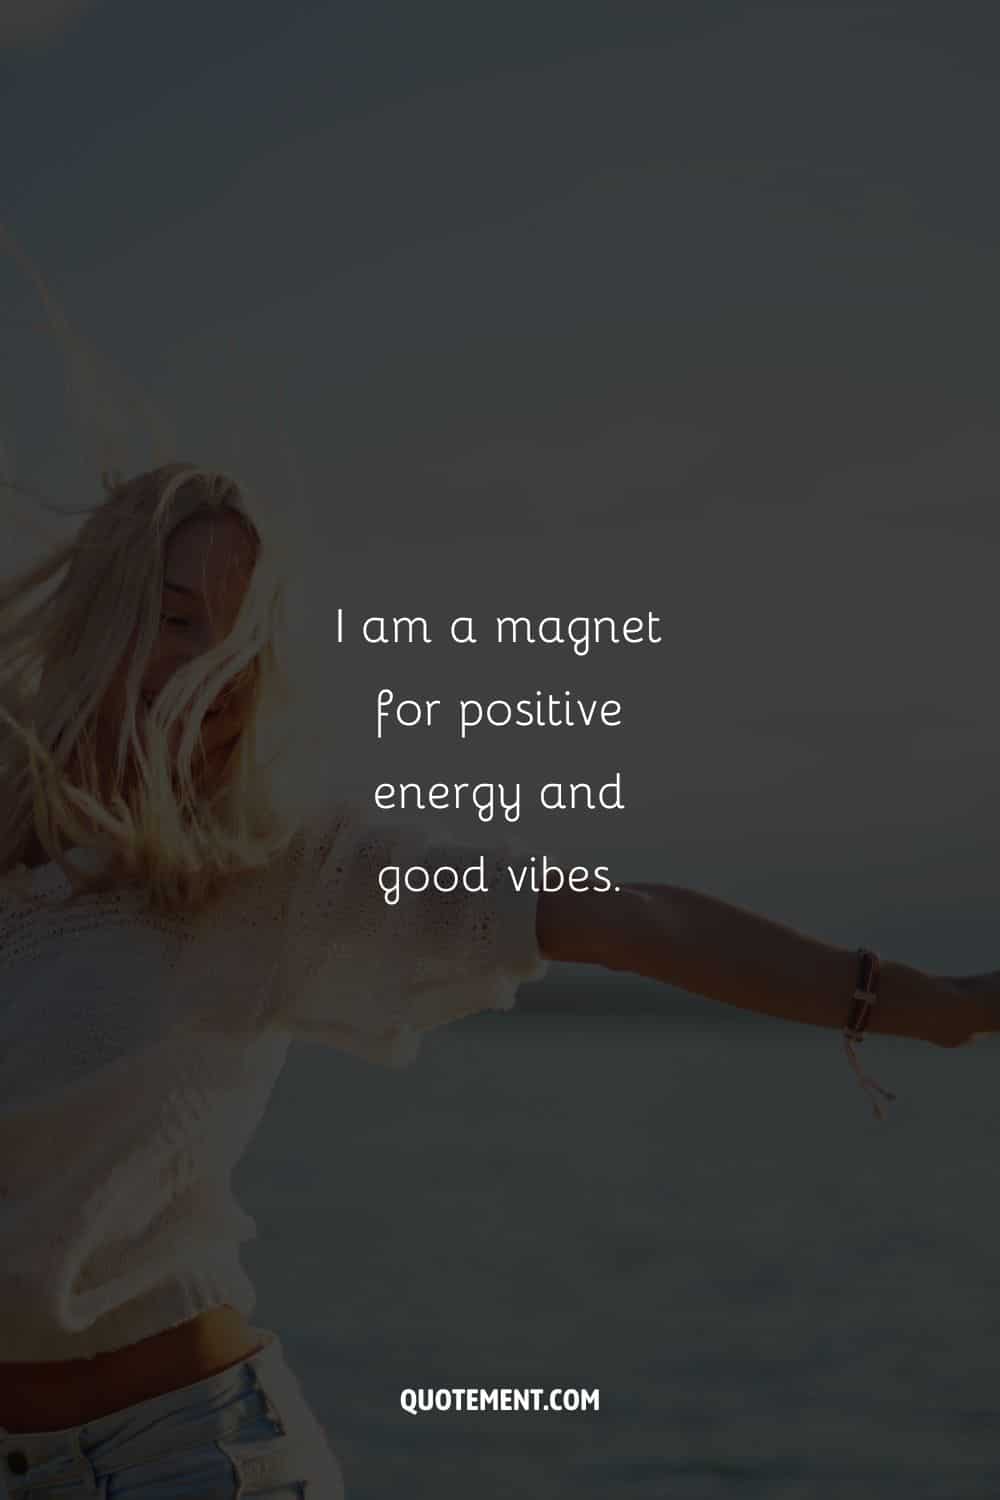 Photograph of a happy woman representing an affirmation for positive energy